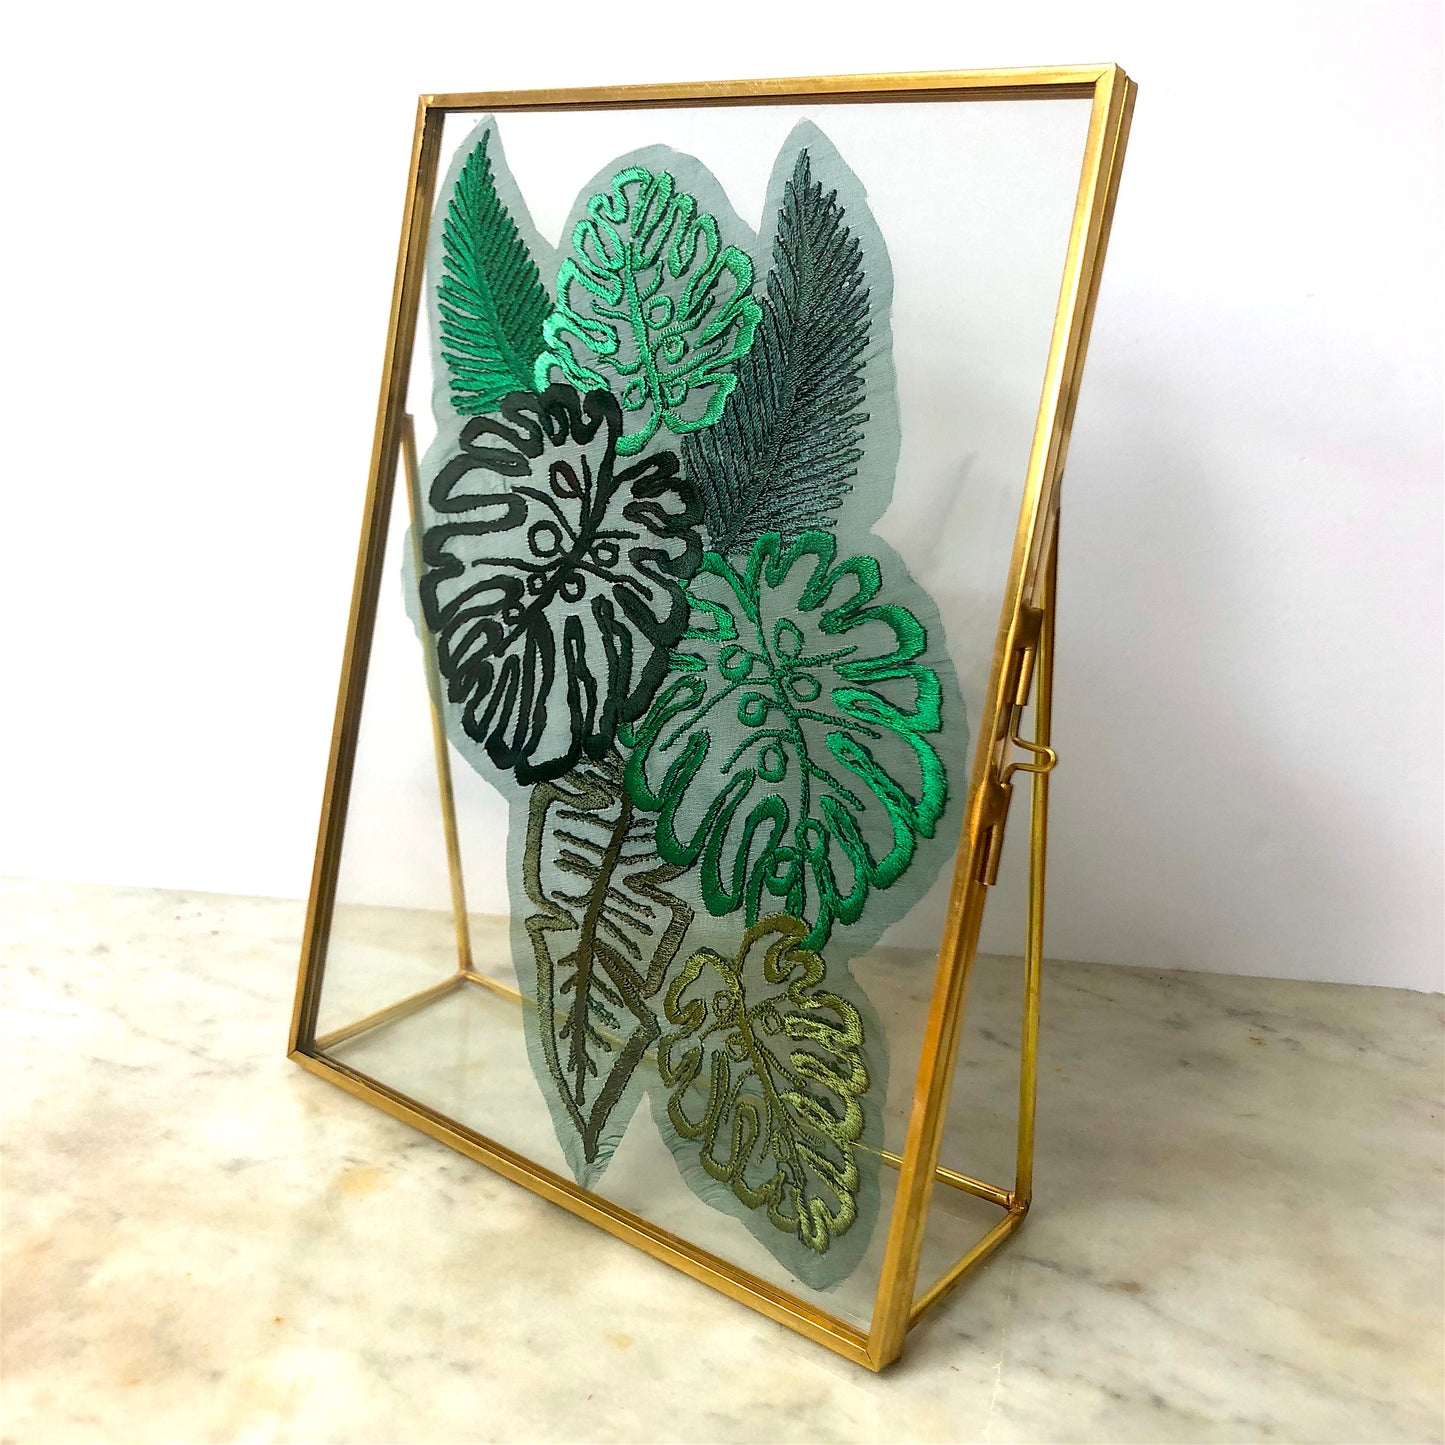 Sheer silk embroidered leaf piece shown in gold glass frame